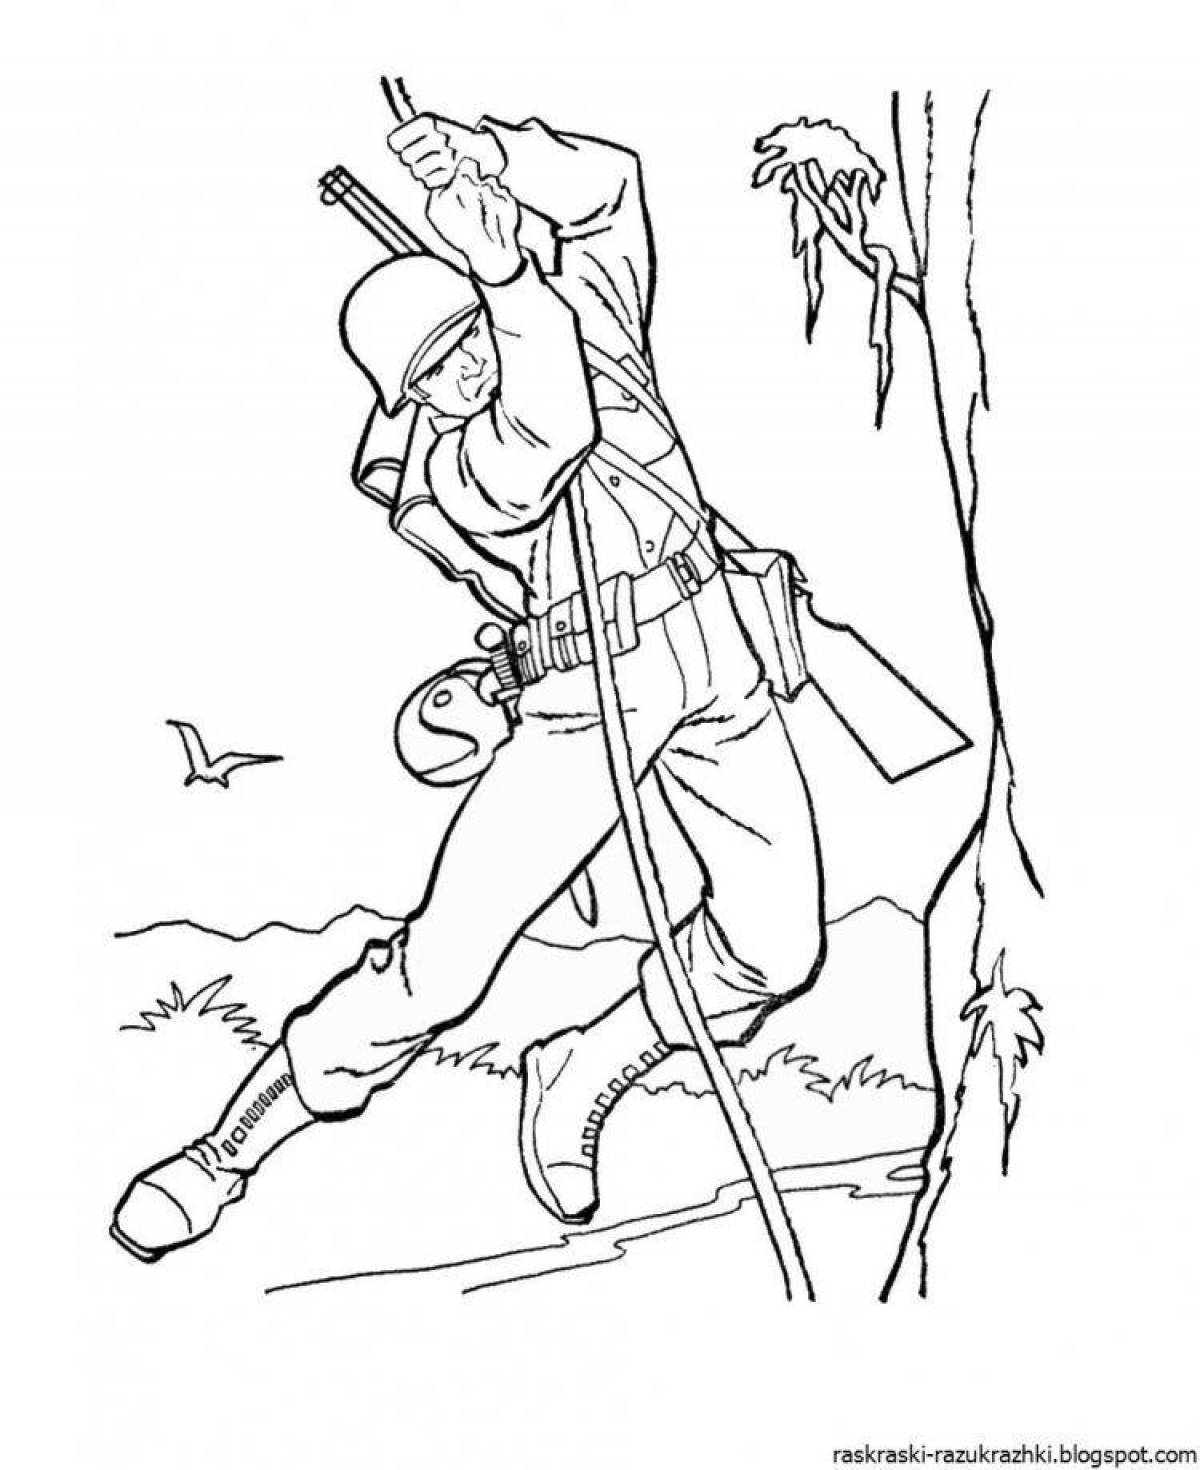 Heroic coloring pages military soldiers